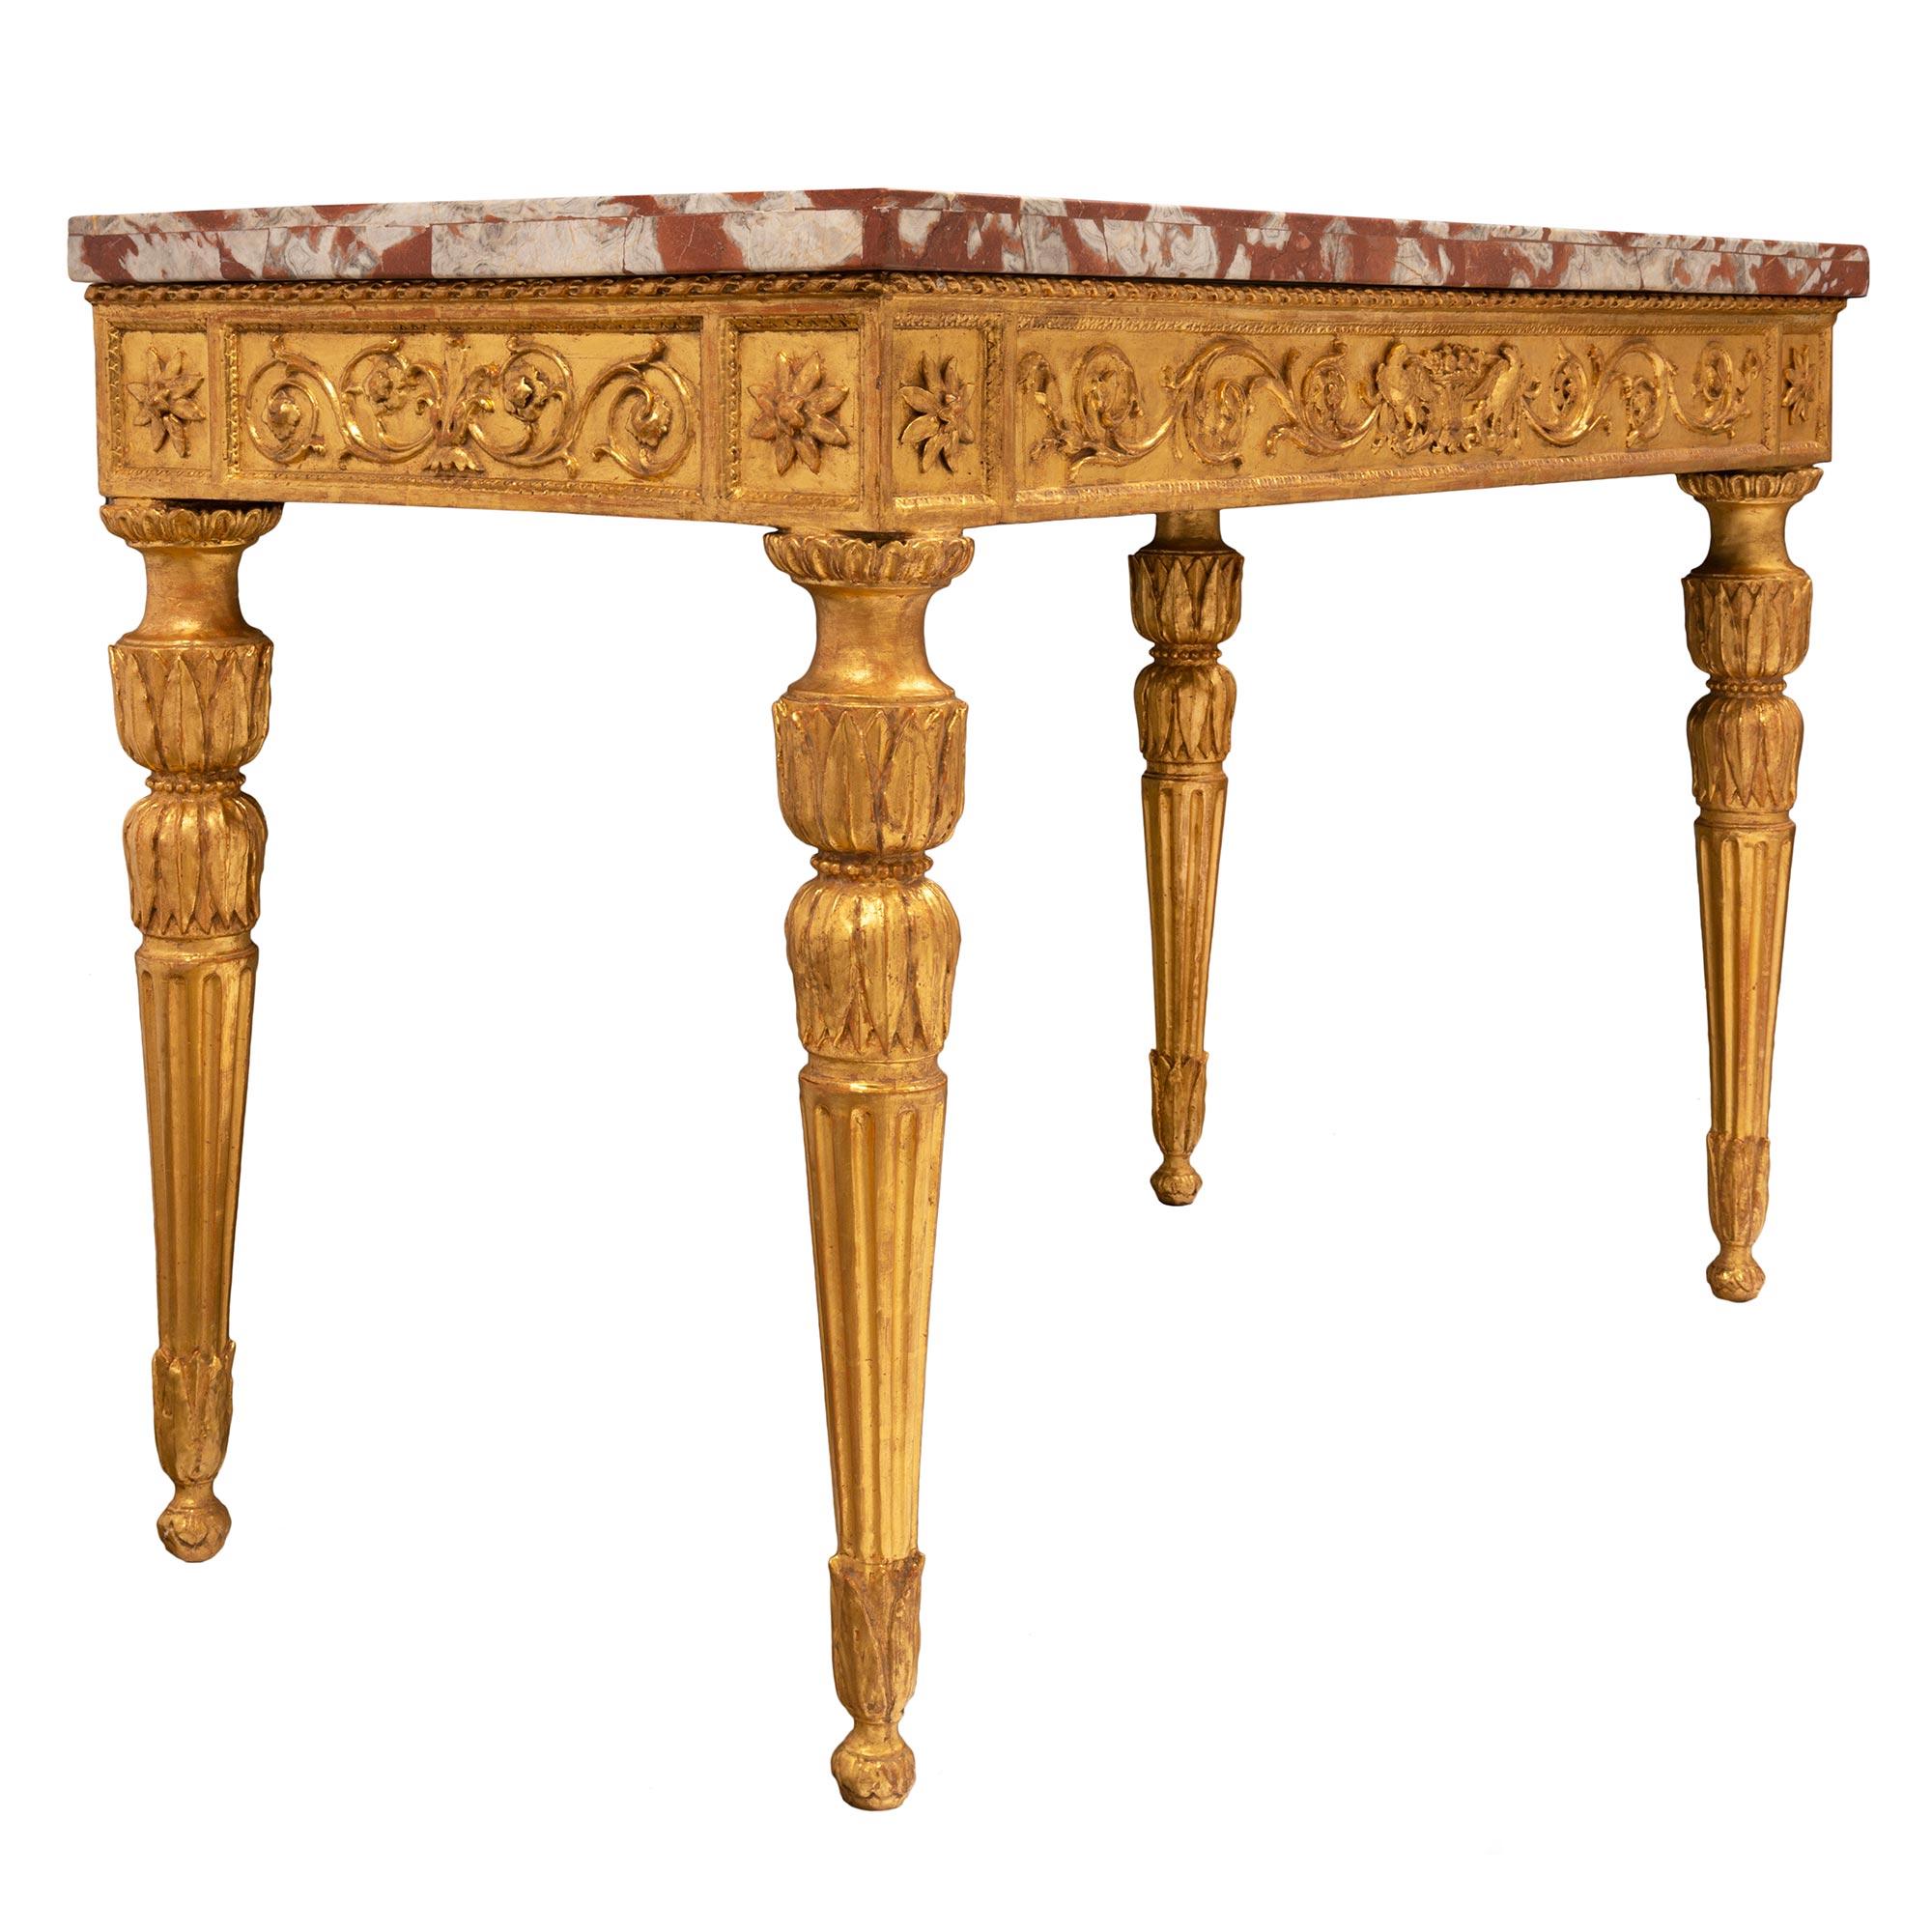 Italian Late 18th Century Giltwood Freestanding Console In Good Condition For Sale In West Palm Beach, FL